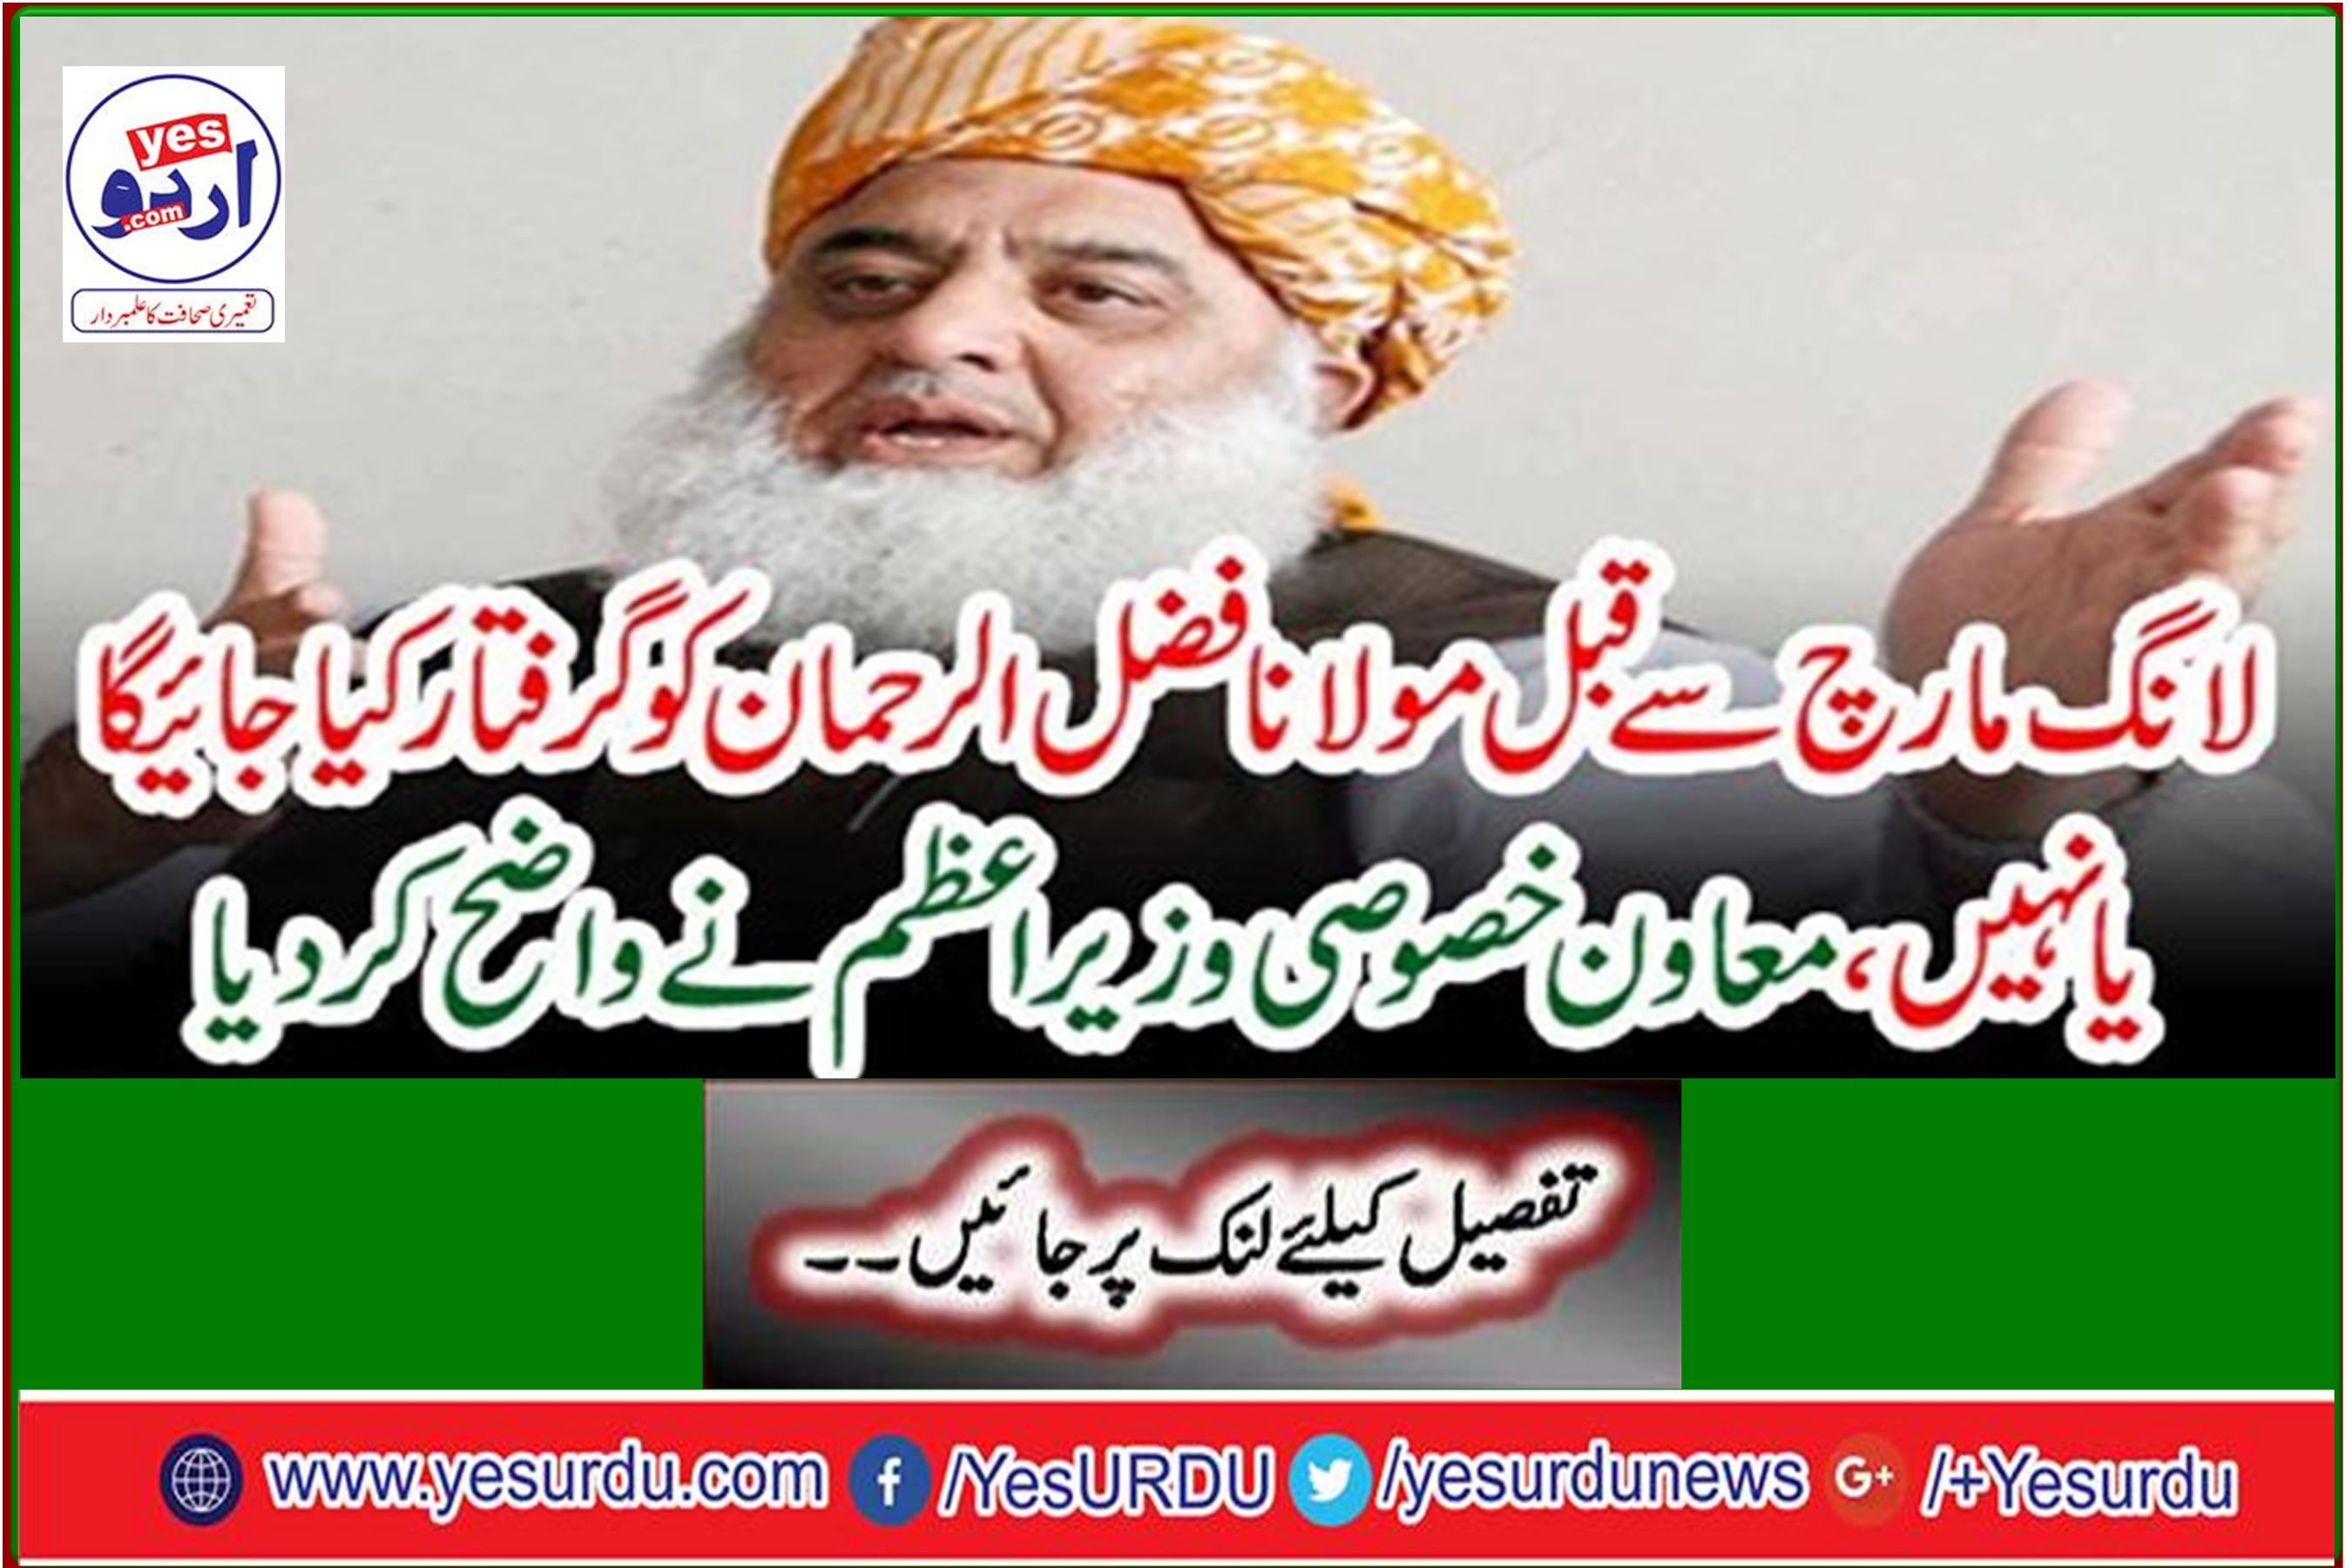 Maulana Fazlur Rehman will not be arrested before Long March, Assistant Special Prime Minister clarified